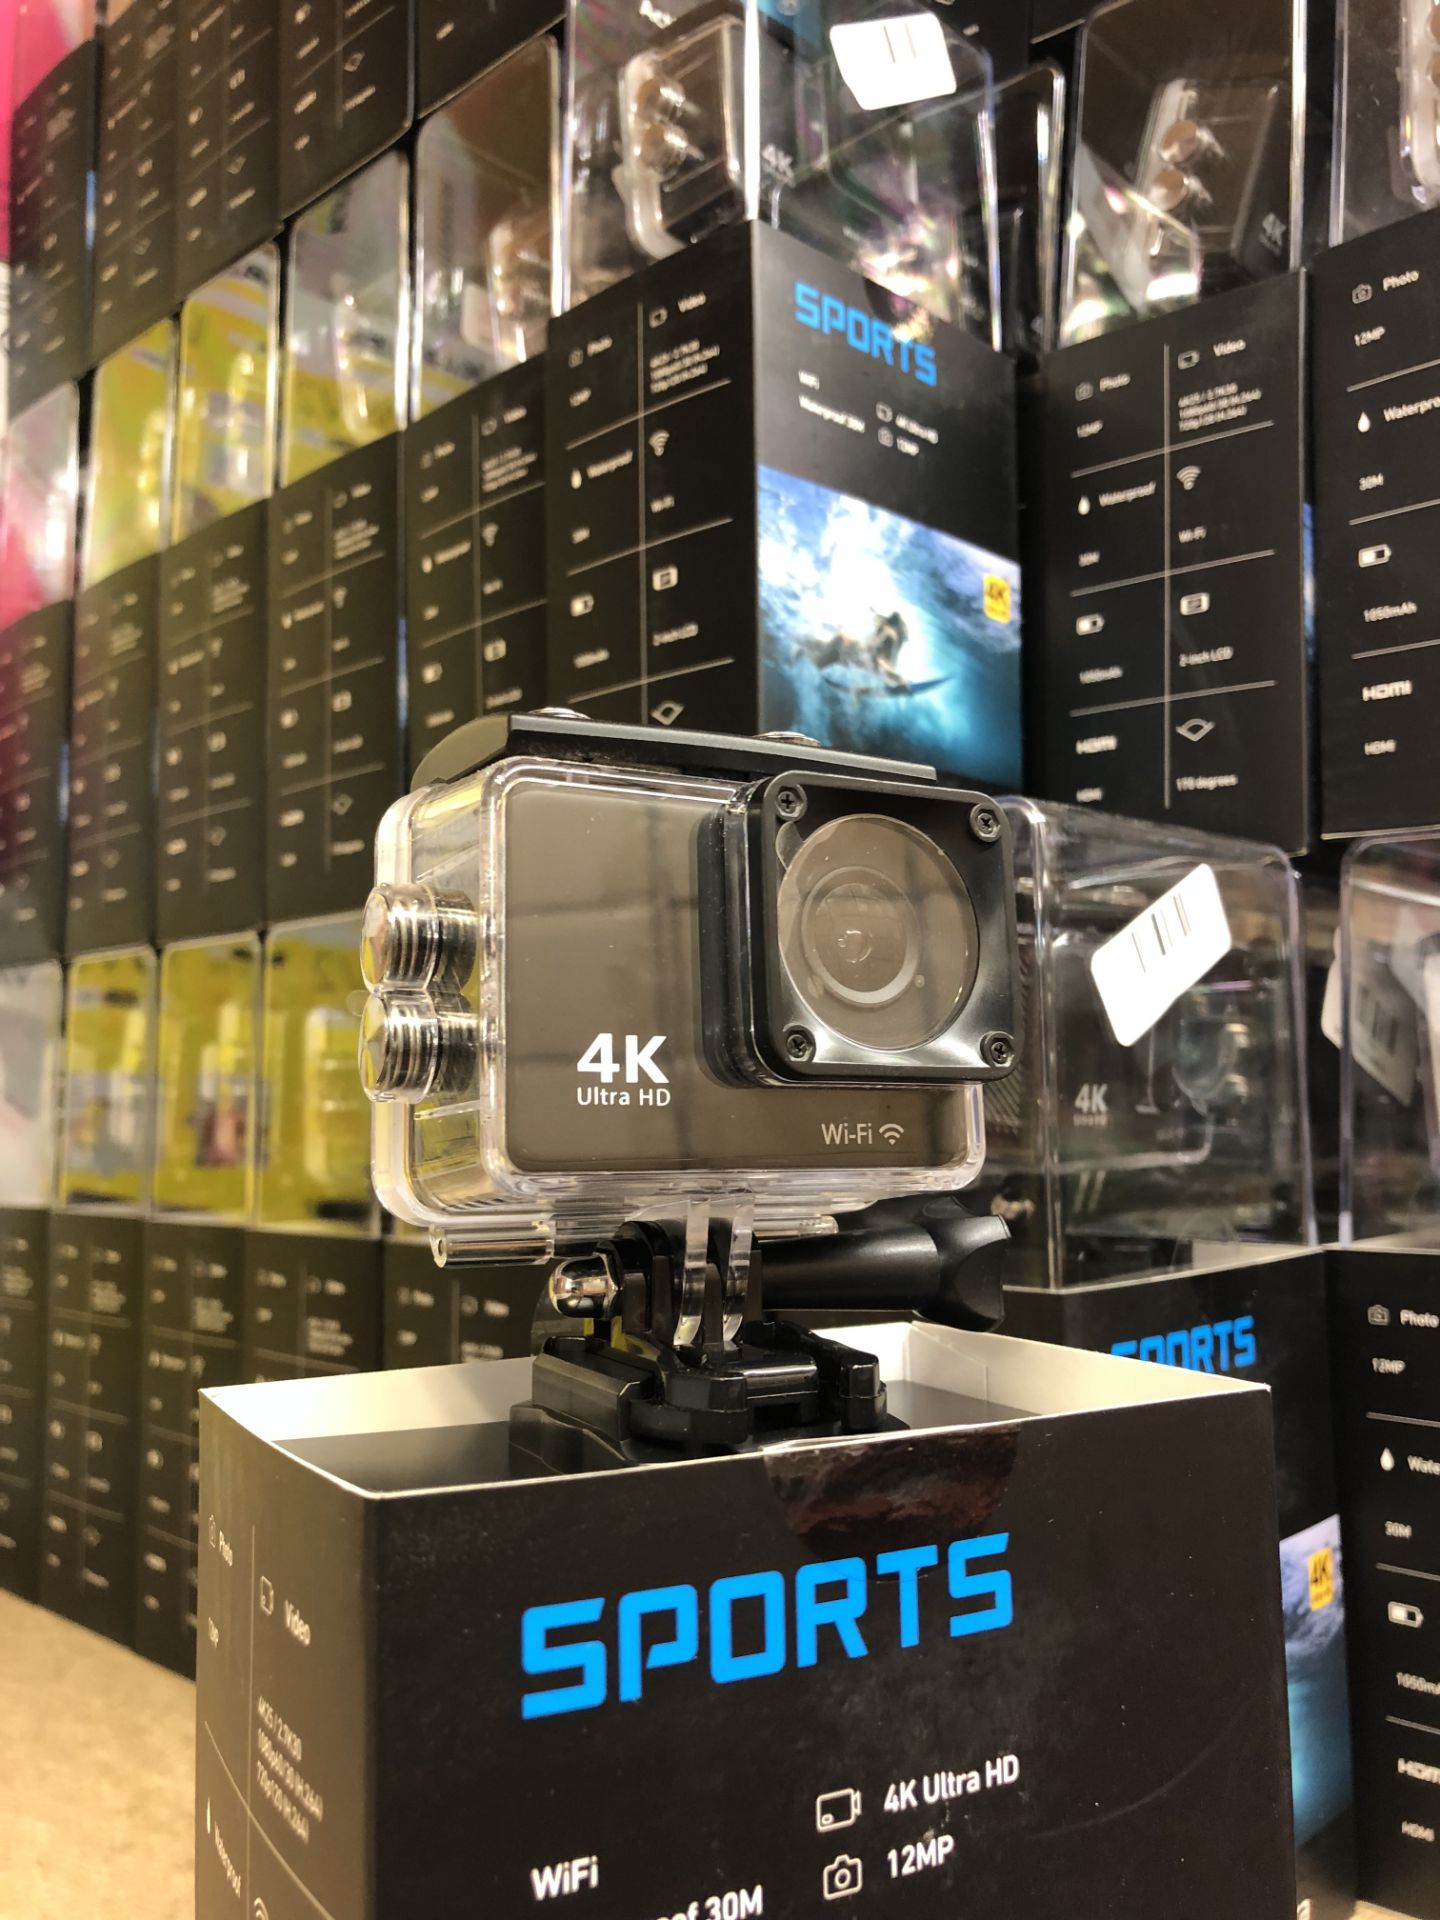 Brand New Full Ultra HD 4K Waterproof WiFi Action Camera With Audio - Box And Accessories - 30m - Image 2 of 2